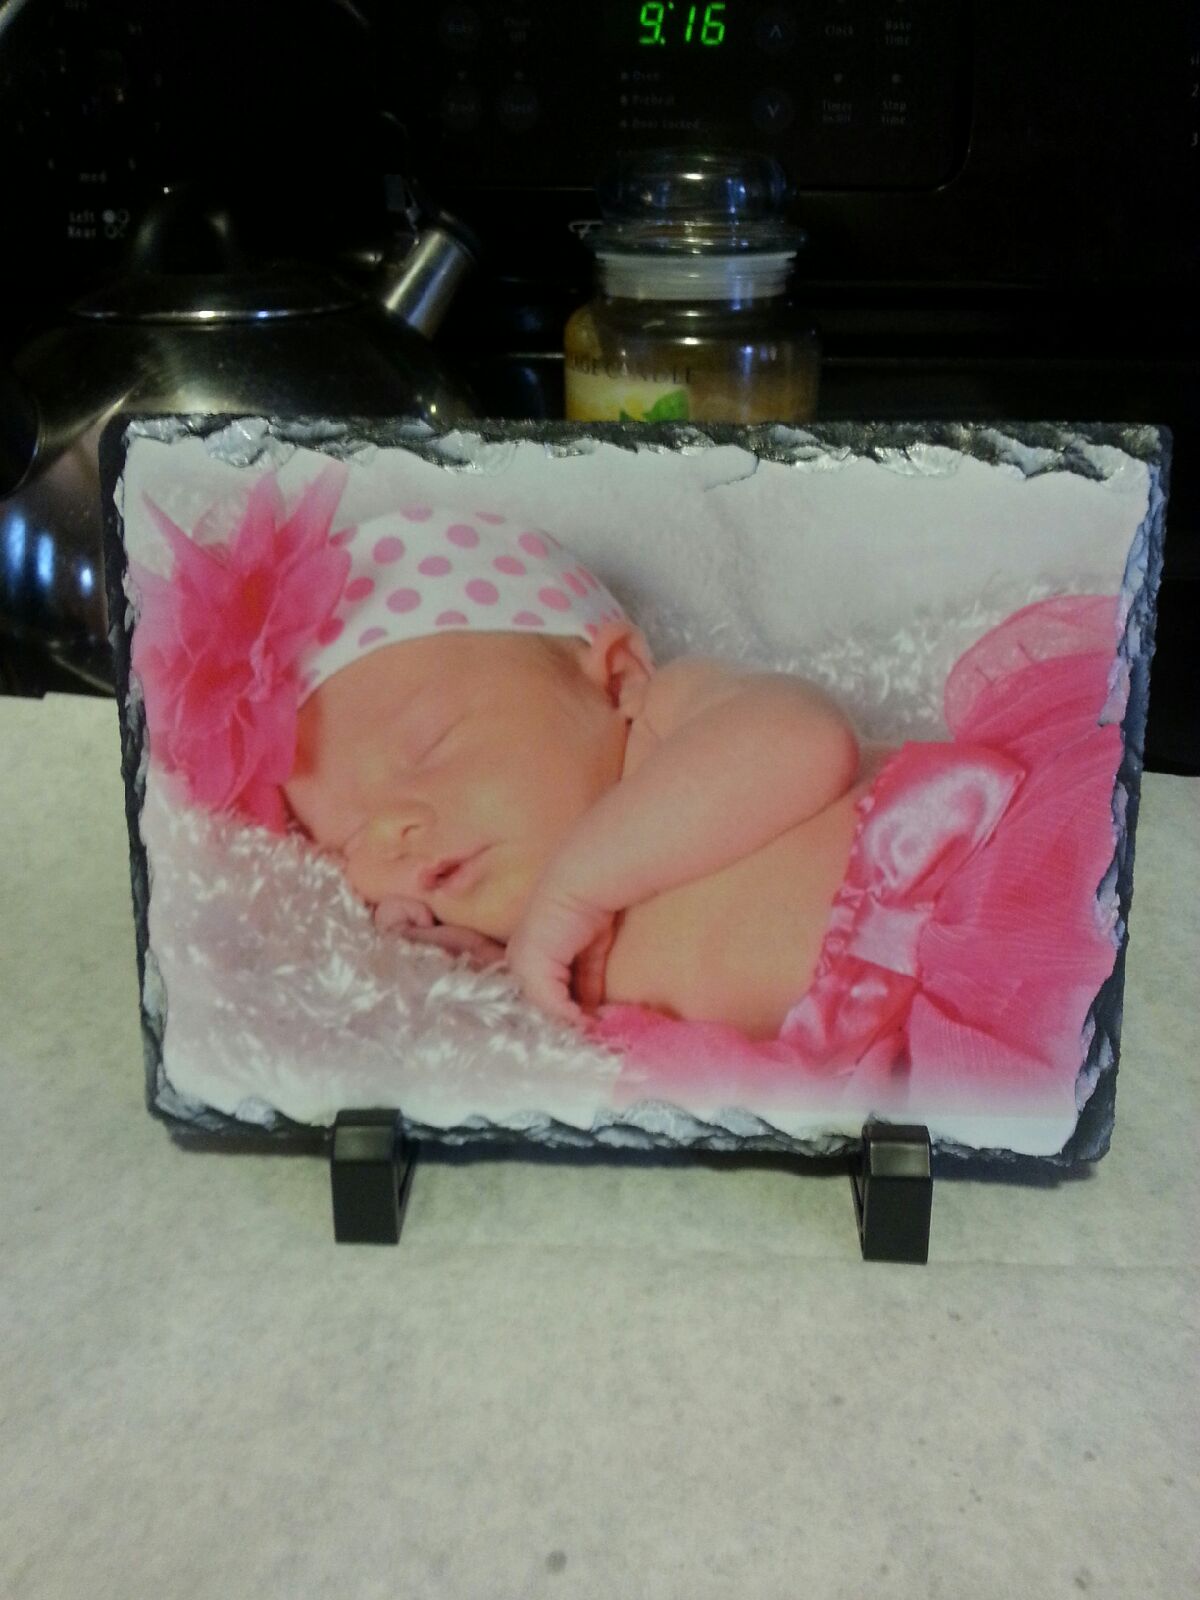 Sublislate with Grandbaby Jaylynn made with sublimation printing